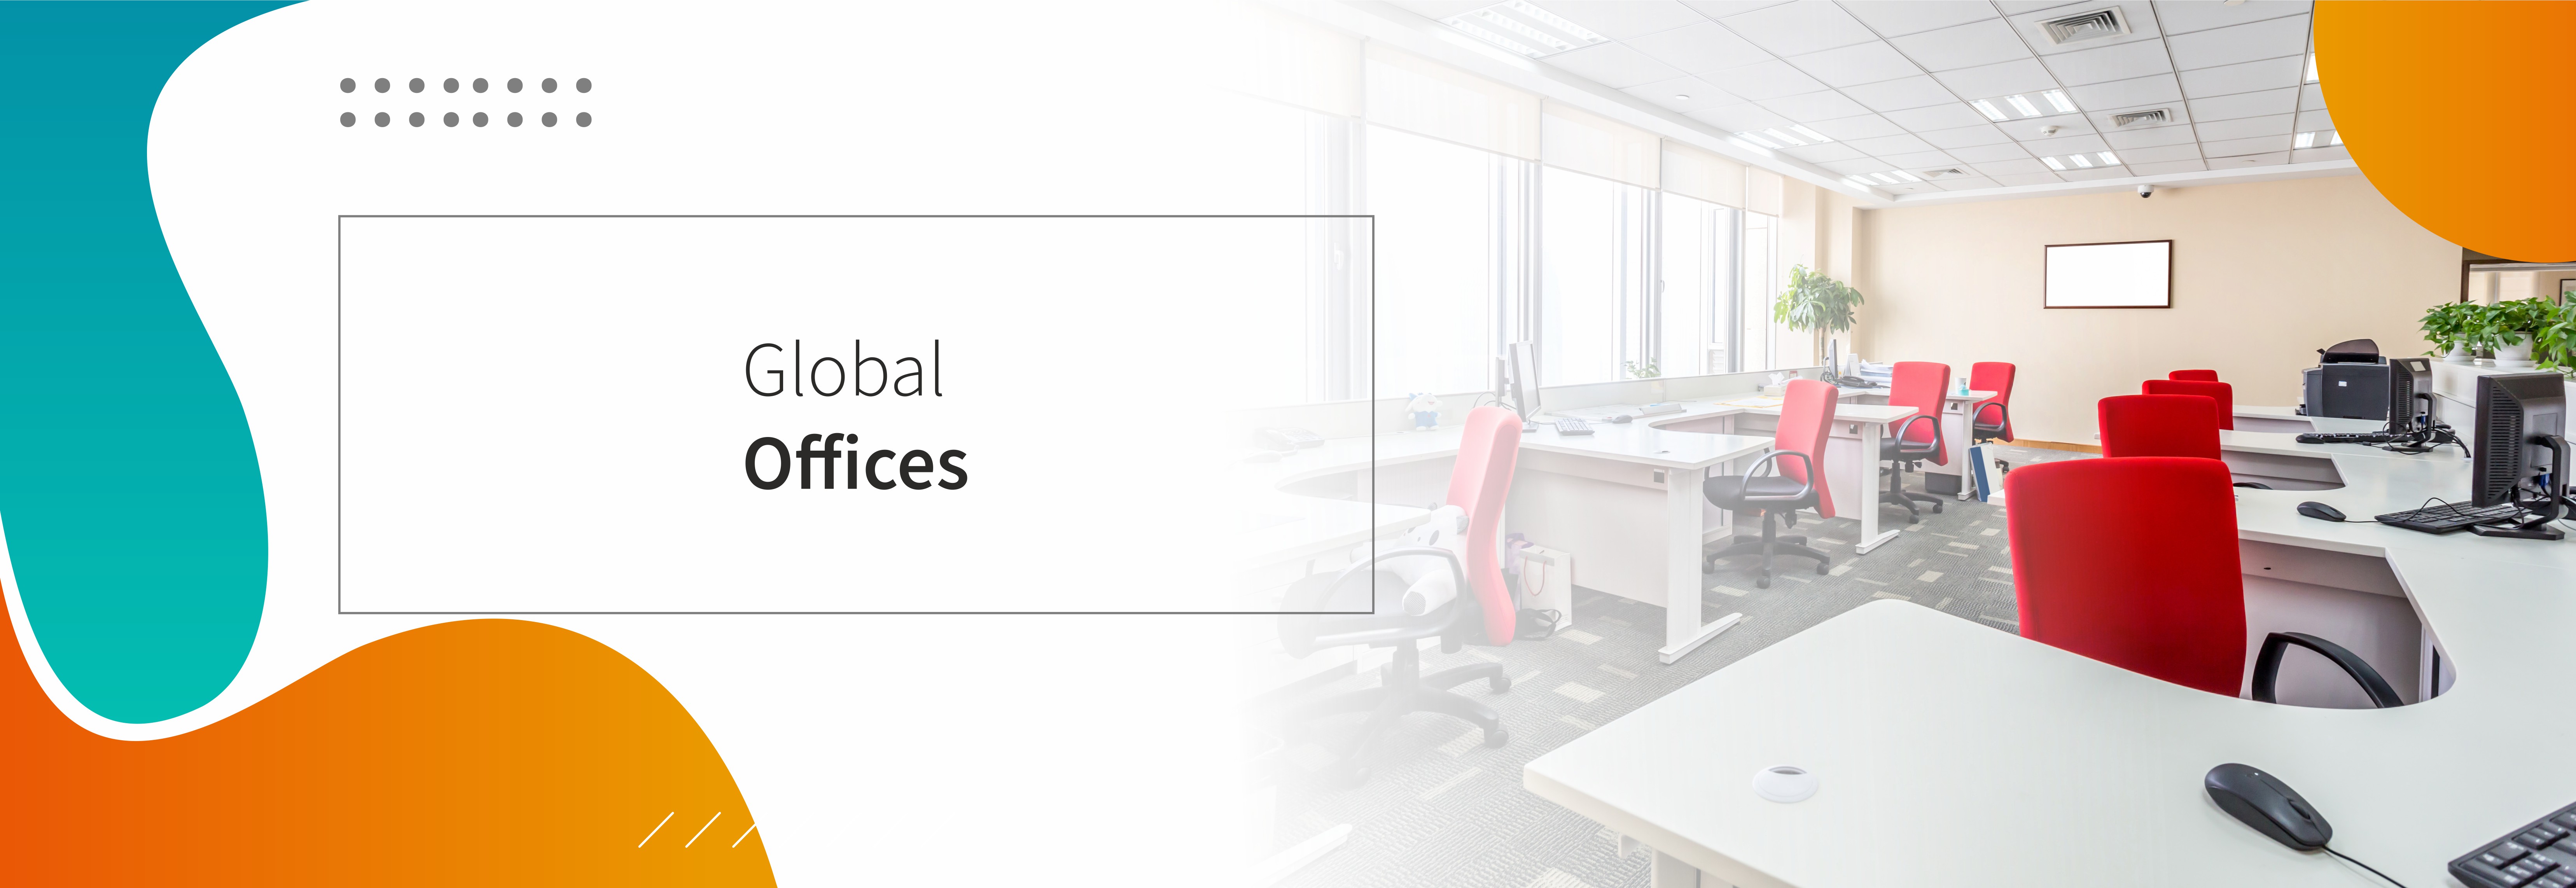 Global Offices Banner